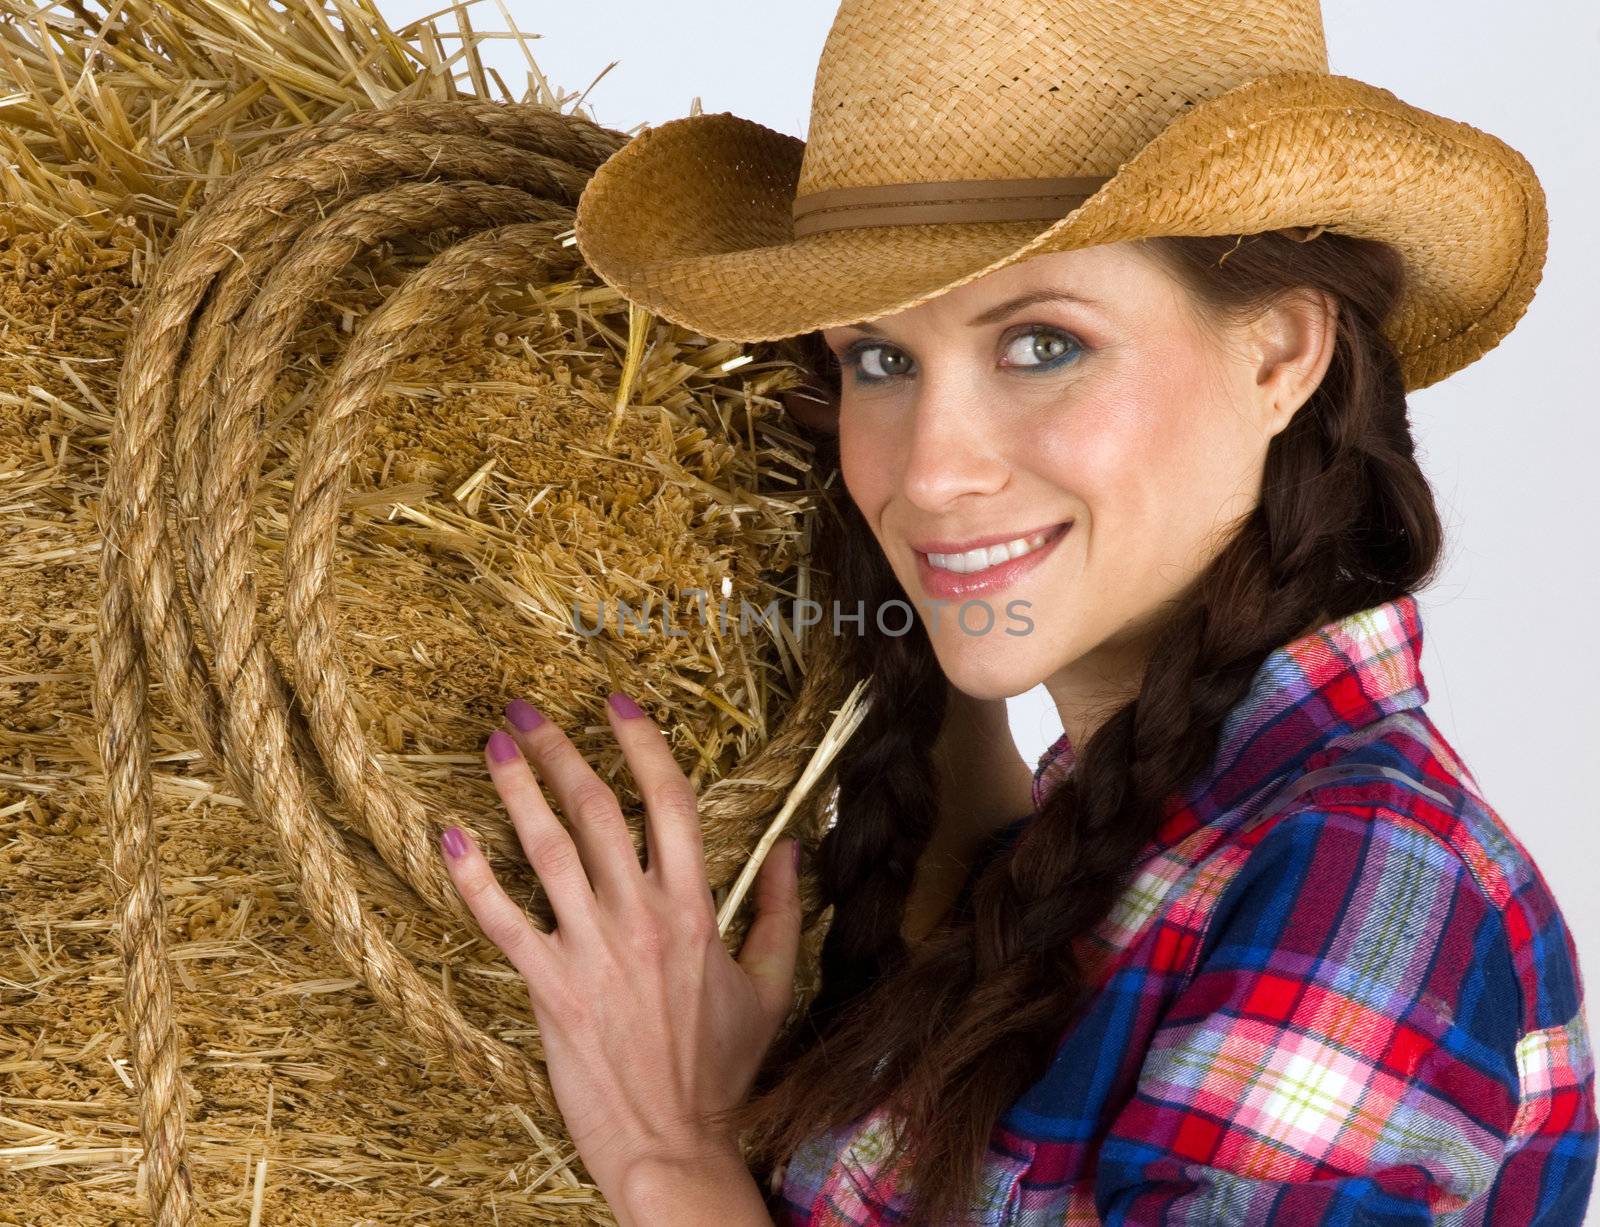 Portrait of a Western Woman by a bale of hay